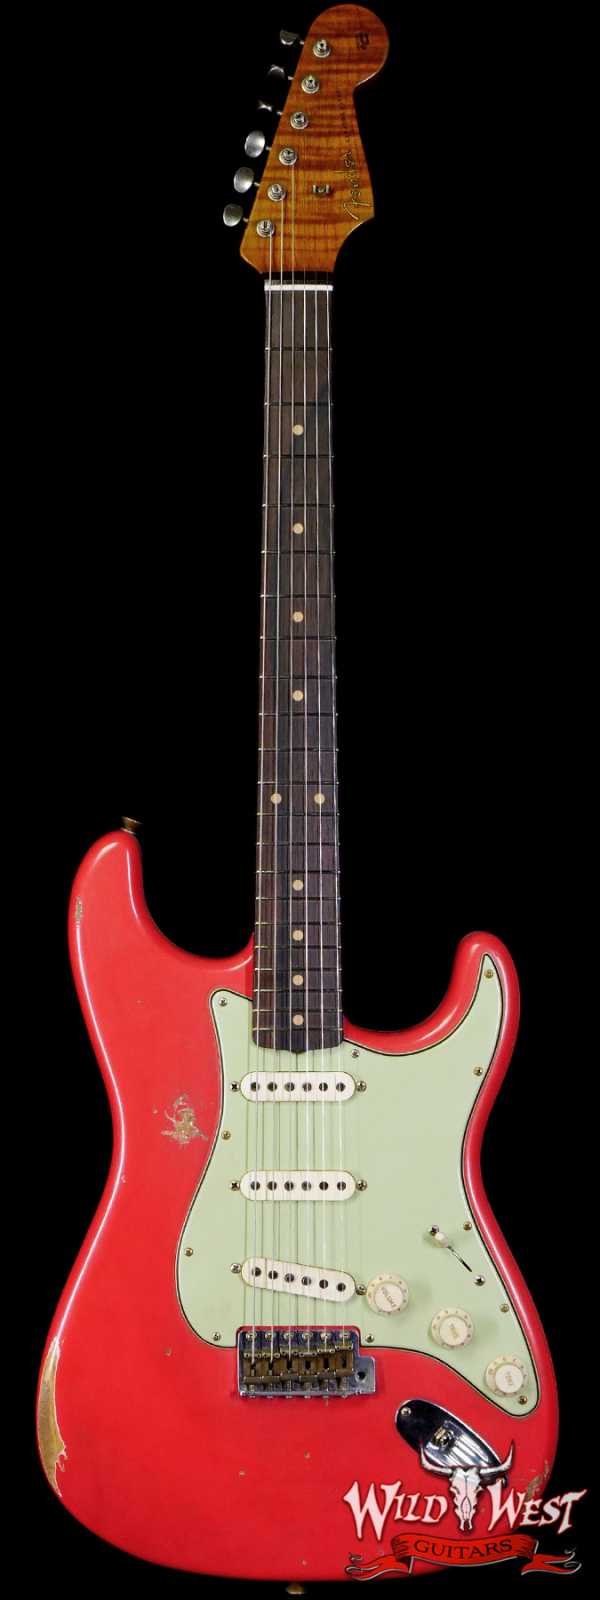 Fender Custom Shop Andy Hicks Masterbuilt 1961 Stratocaster Roasted Flame Maple Neck Brazilian Rosewood Board Relic Fiesta Red